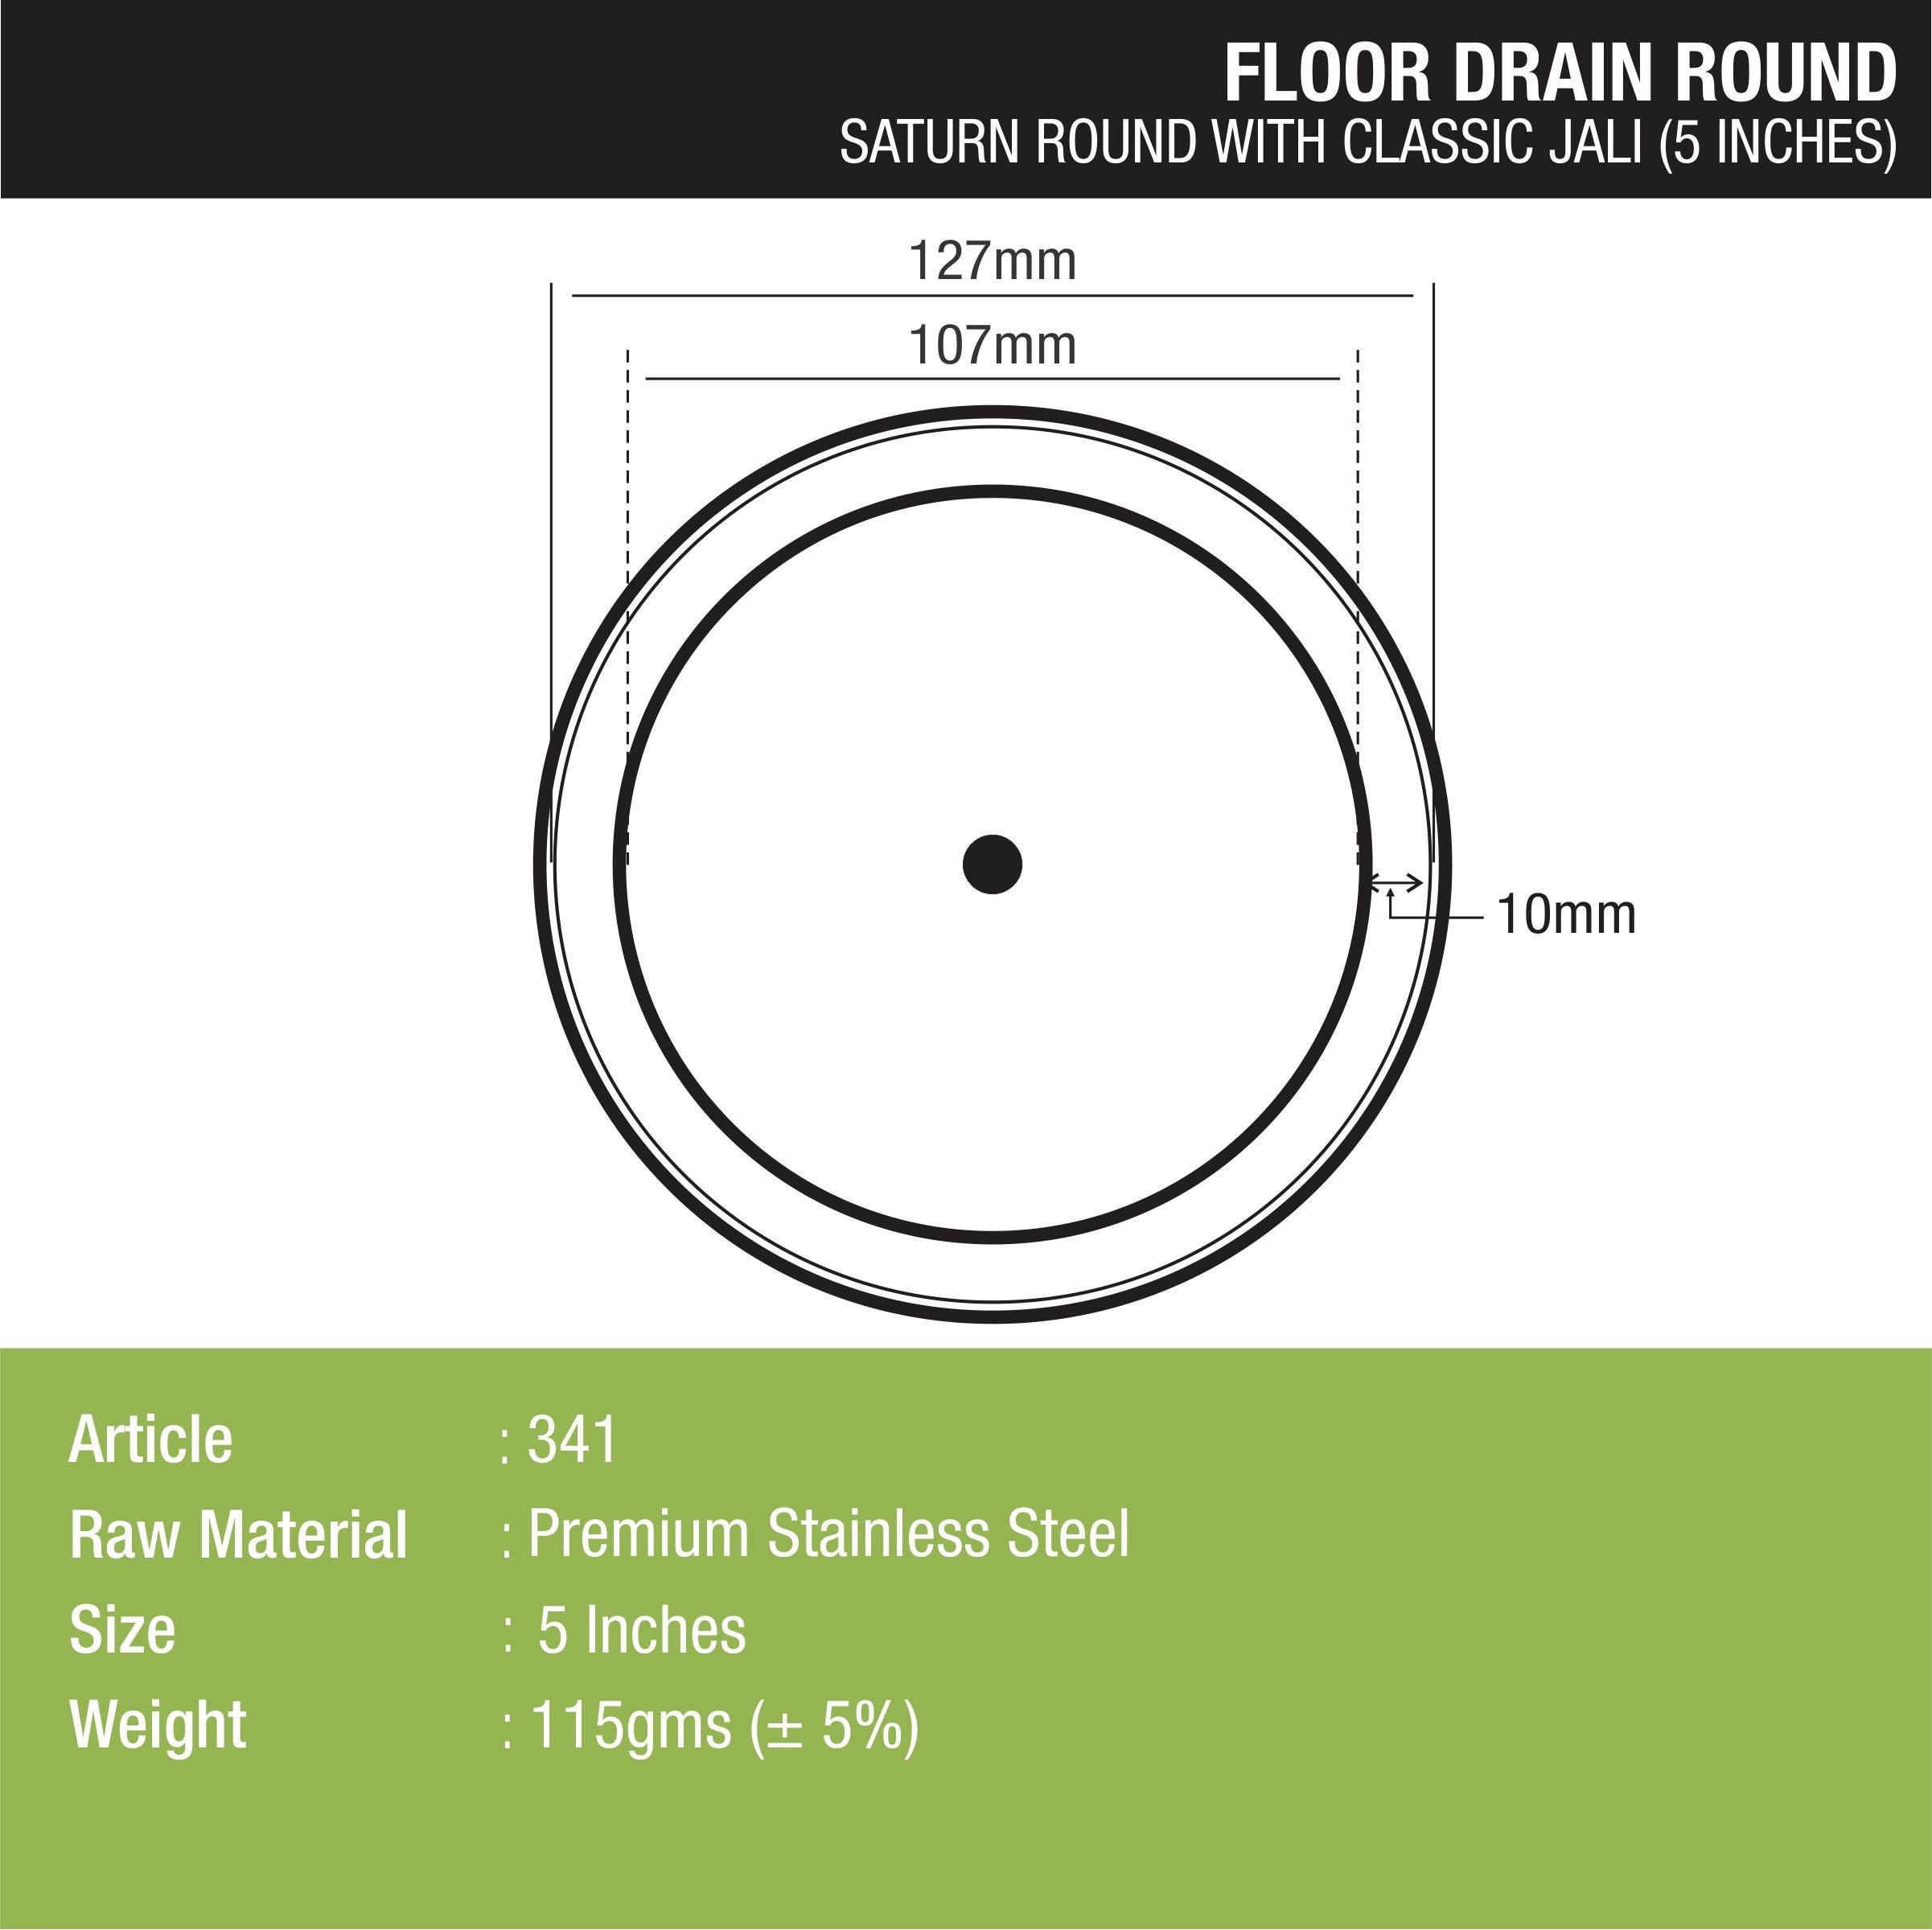 Saturn Round Floor Drain with Classic Jali (5 inches) dimensions and sizes